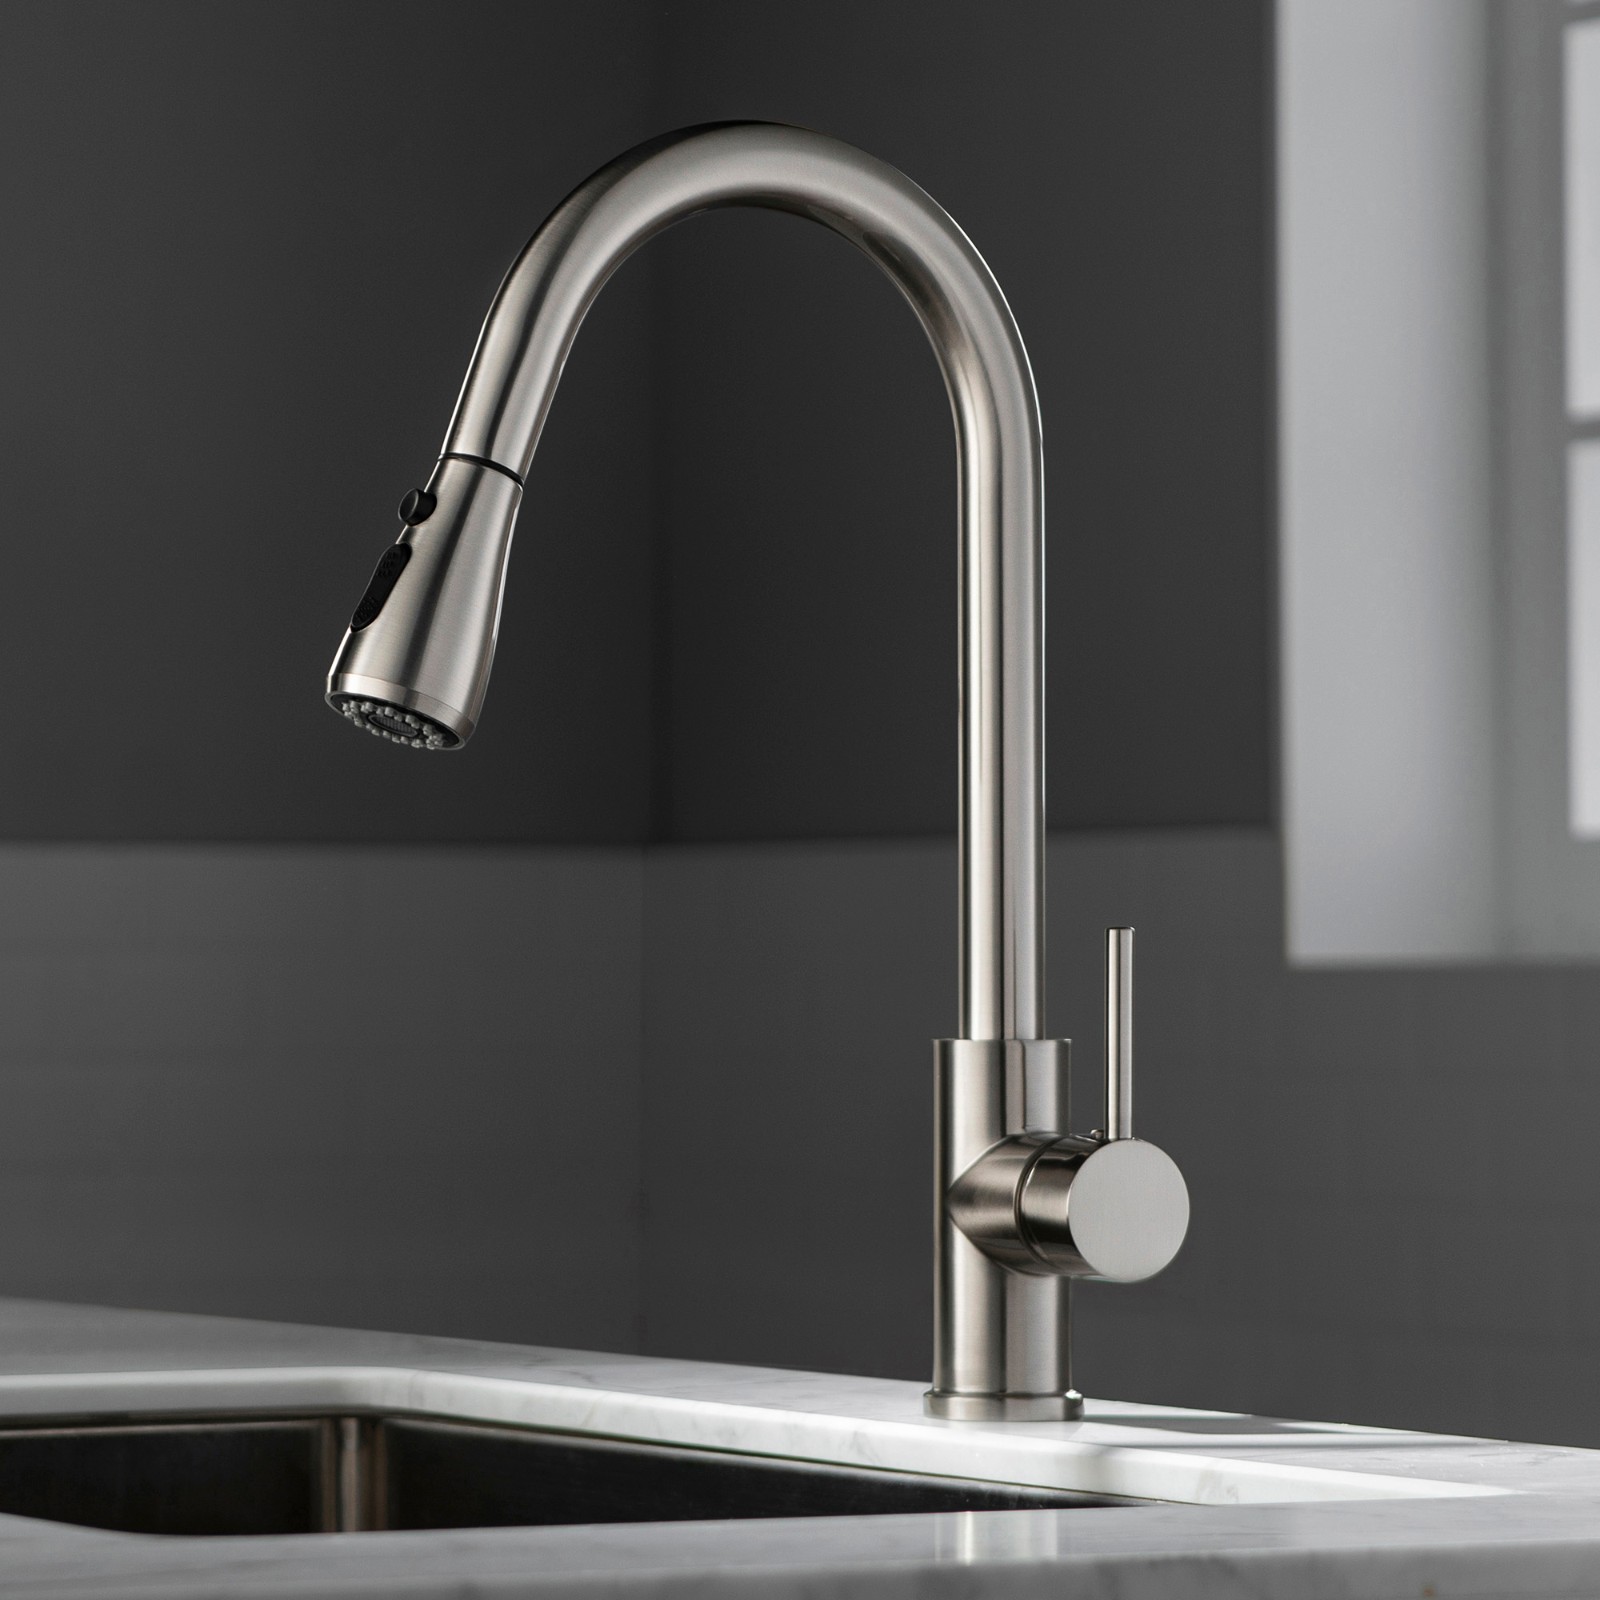  WOODBRIDGE WK090802BN Single Handle Pull Down Kitchen Faucet in Brushed Nickel Finish_5014